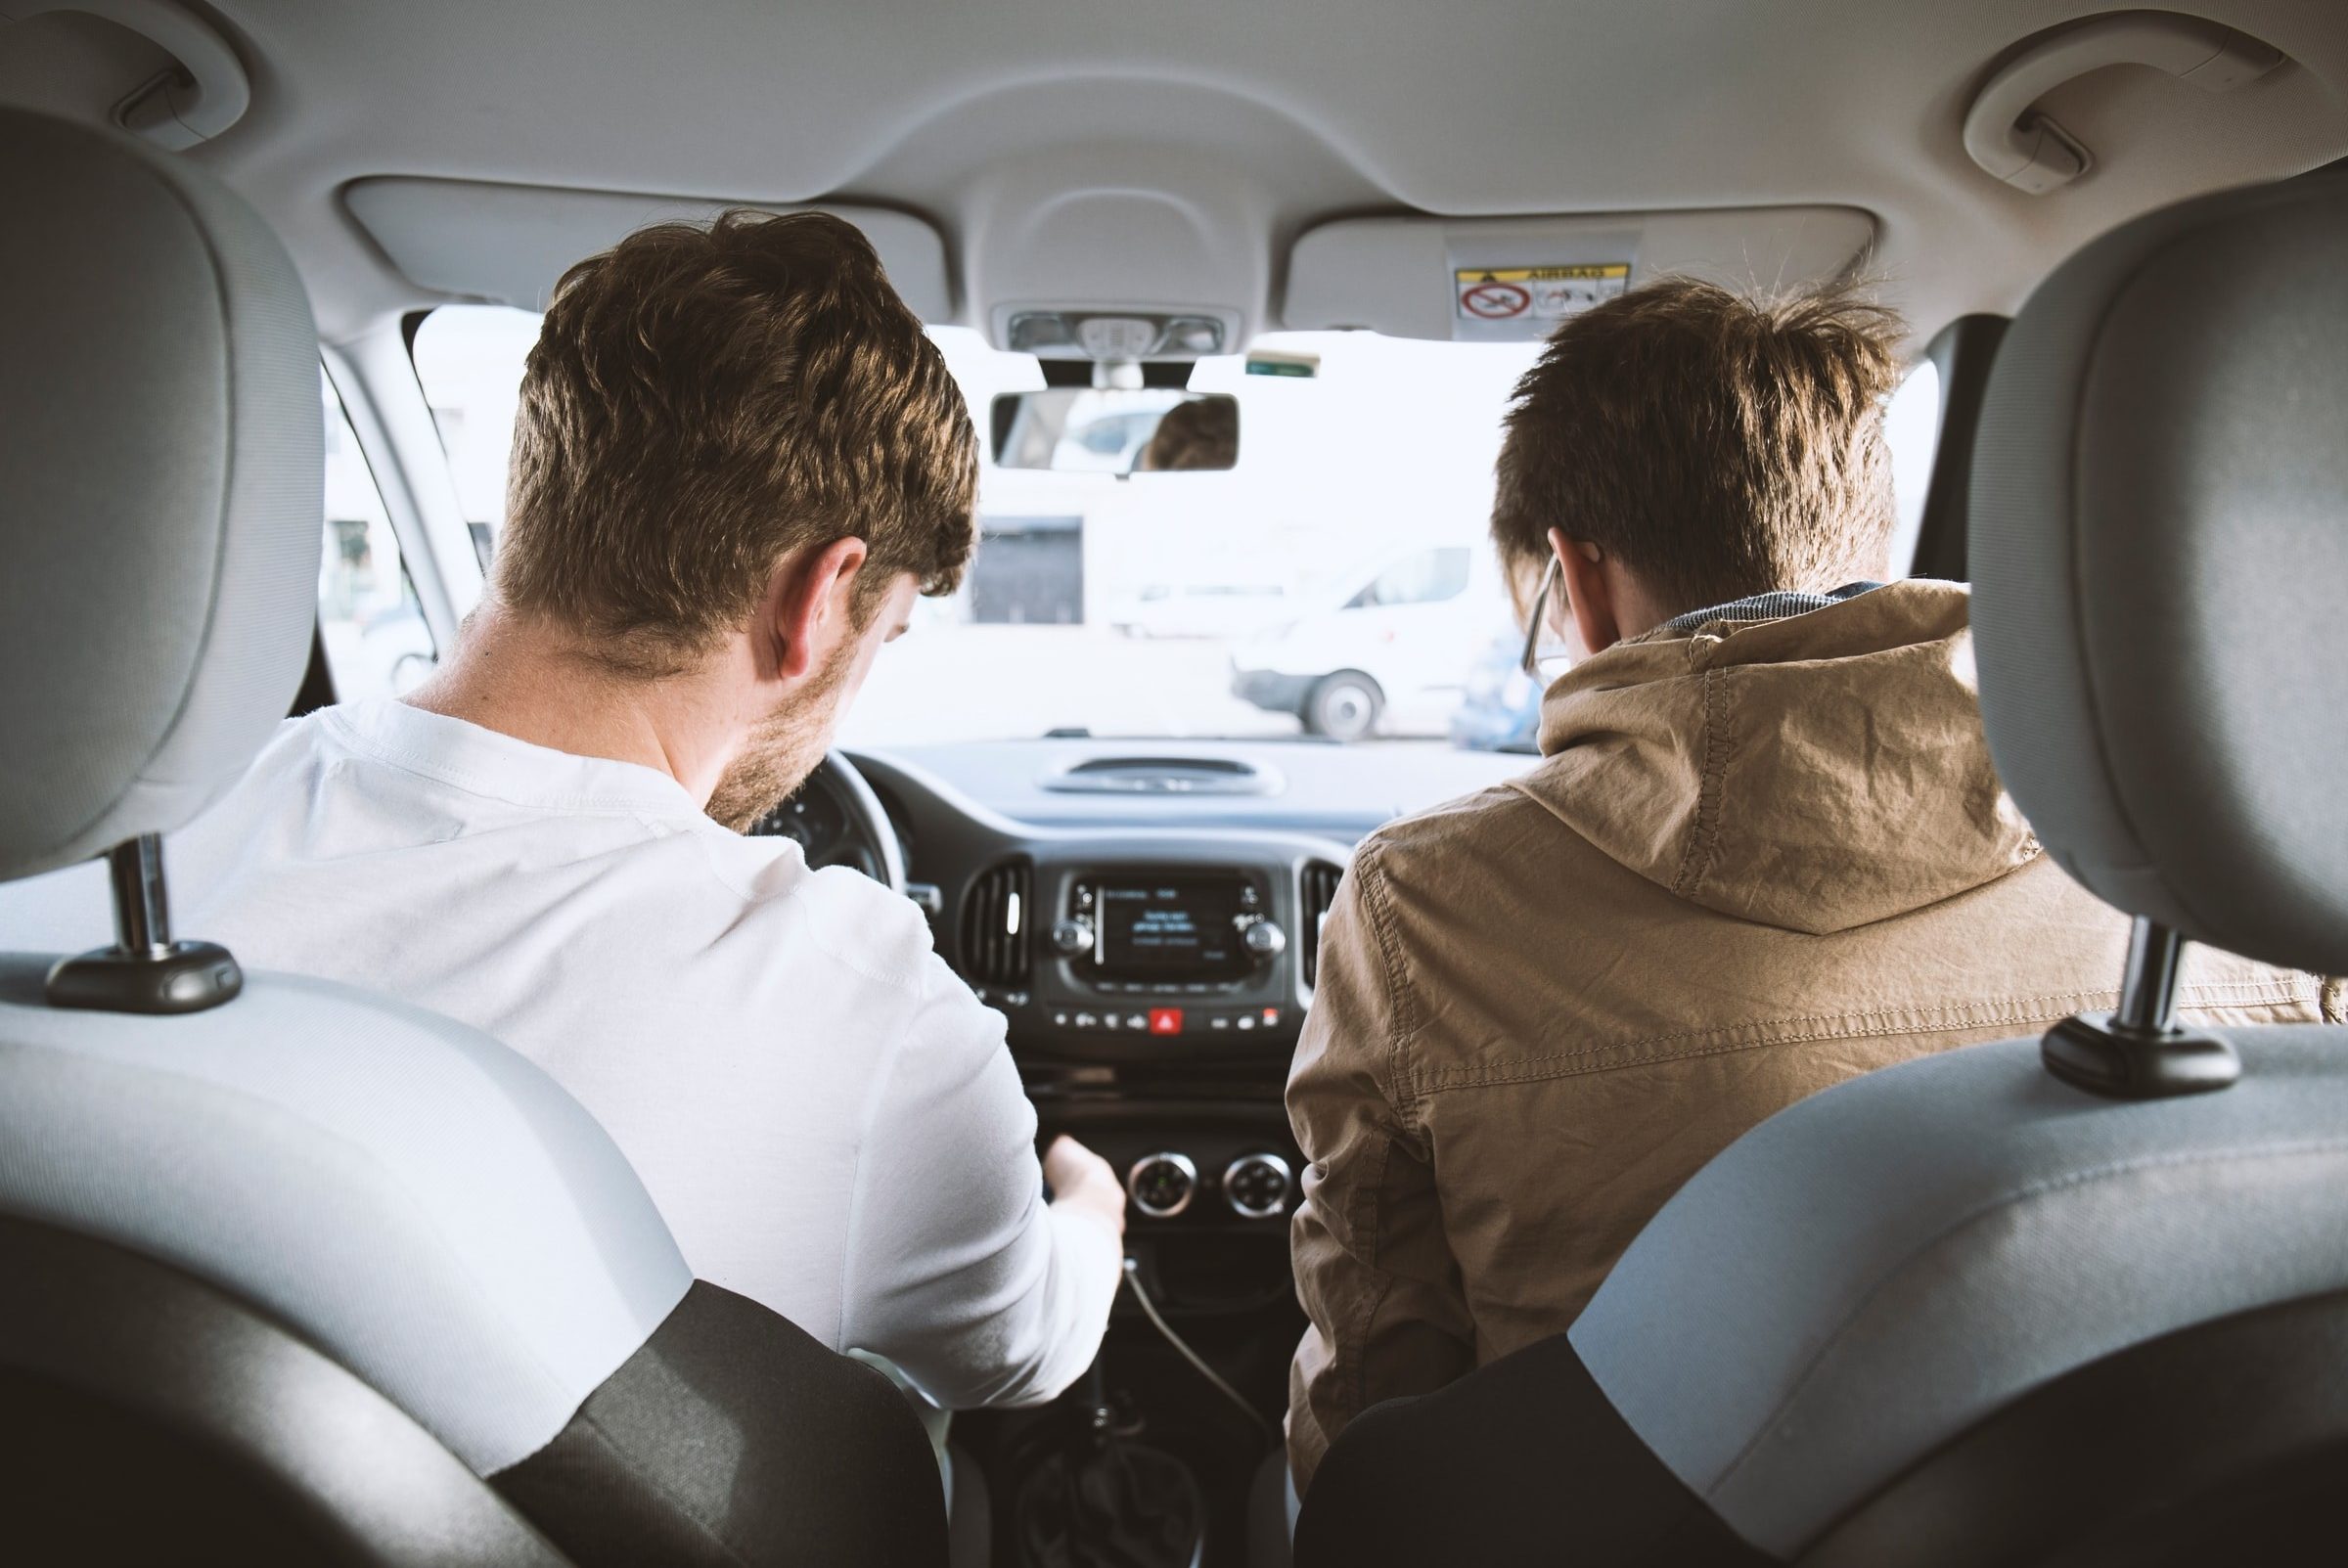 How to Use BlaBlaCar When Traveling Around Europe